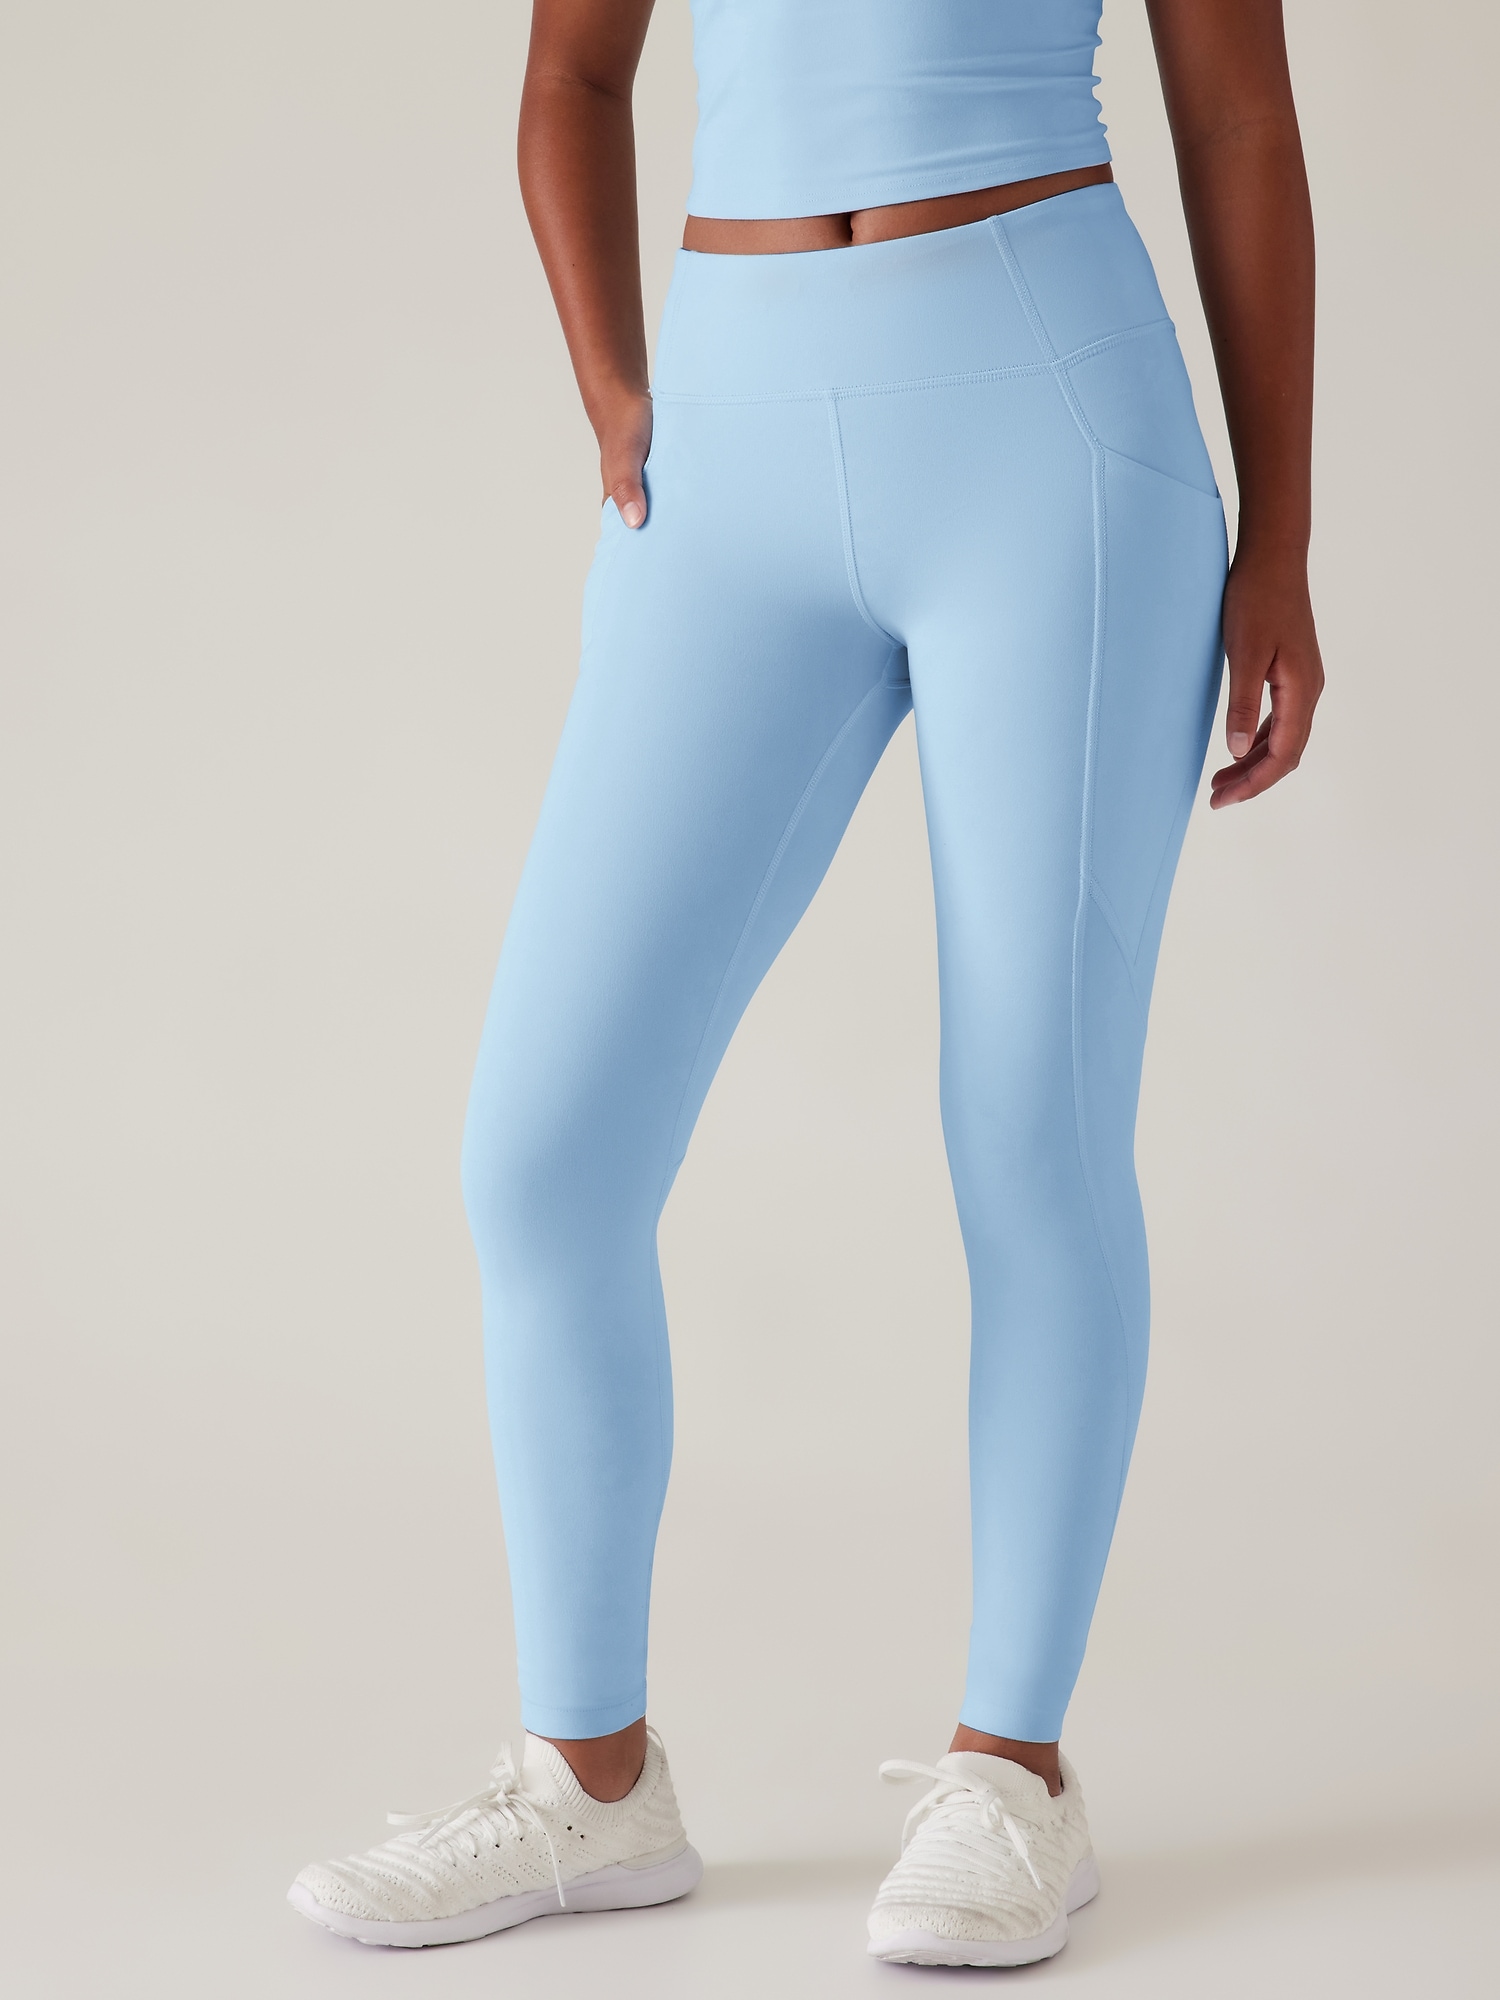 BOTTOMS – tagged leggings – Perfect Little Peach